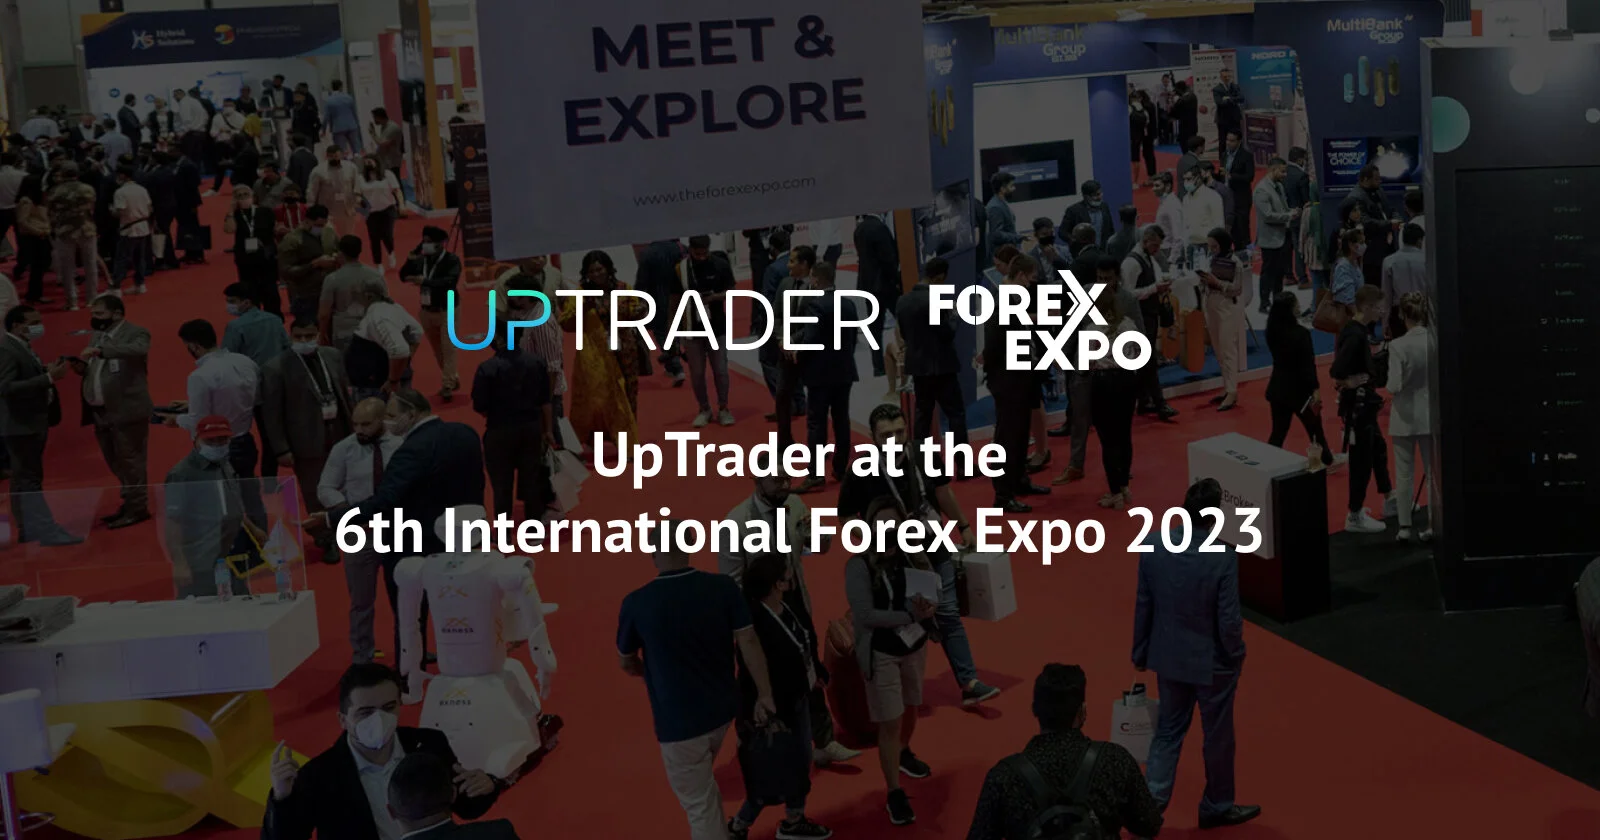 UpTrader at the 6th International Forex Expo 2023